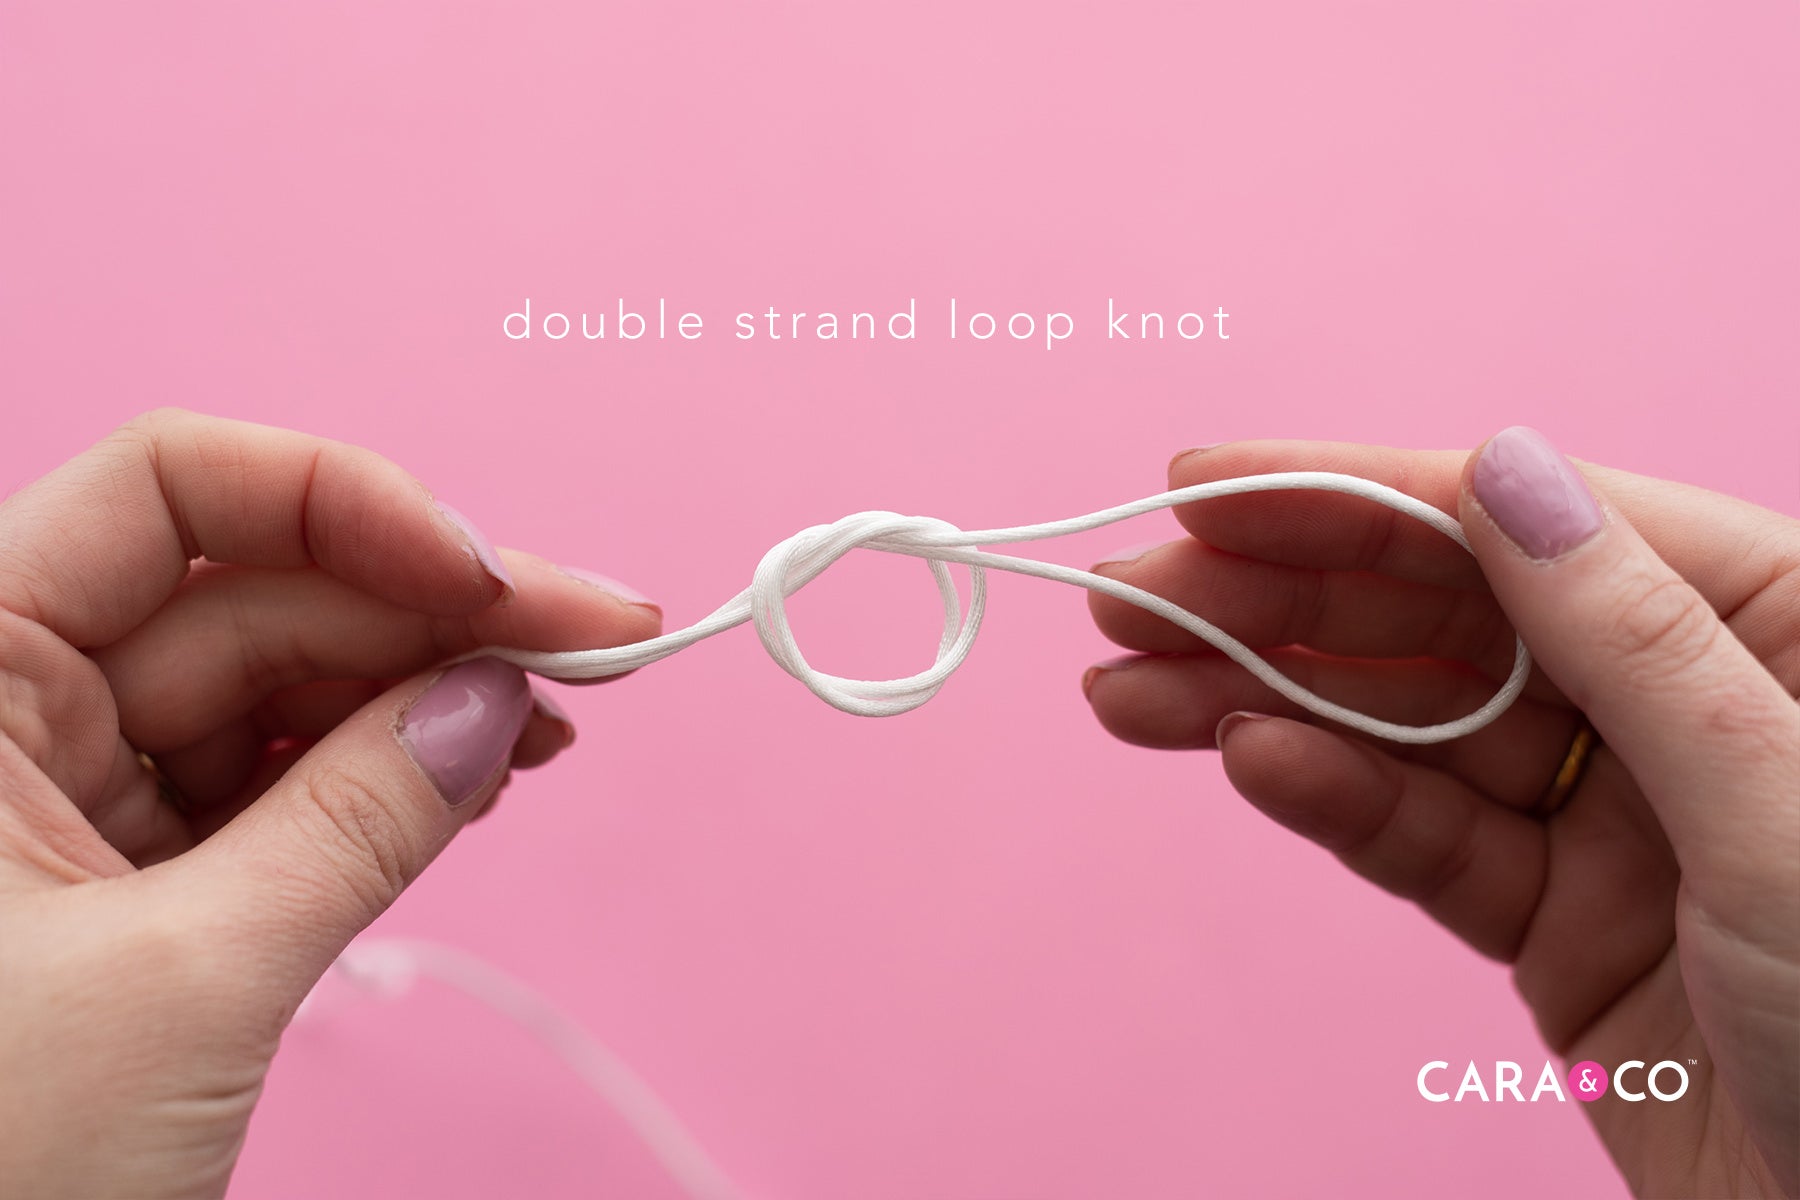 Double Strand Loop Knot Example - Cara & Co